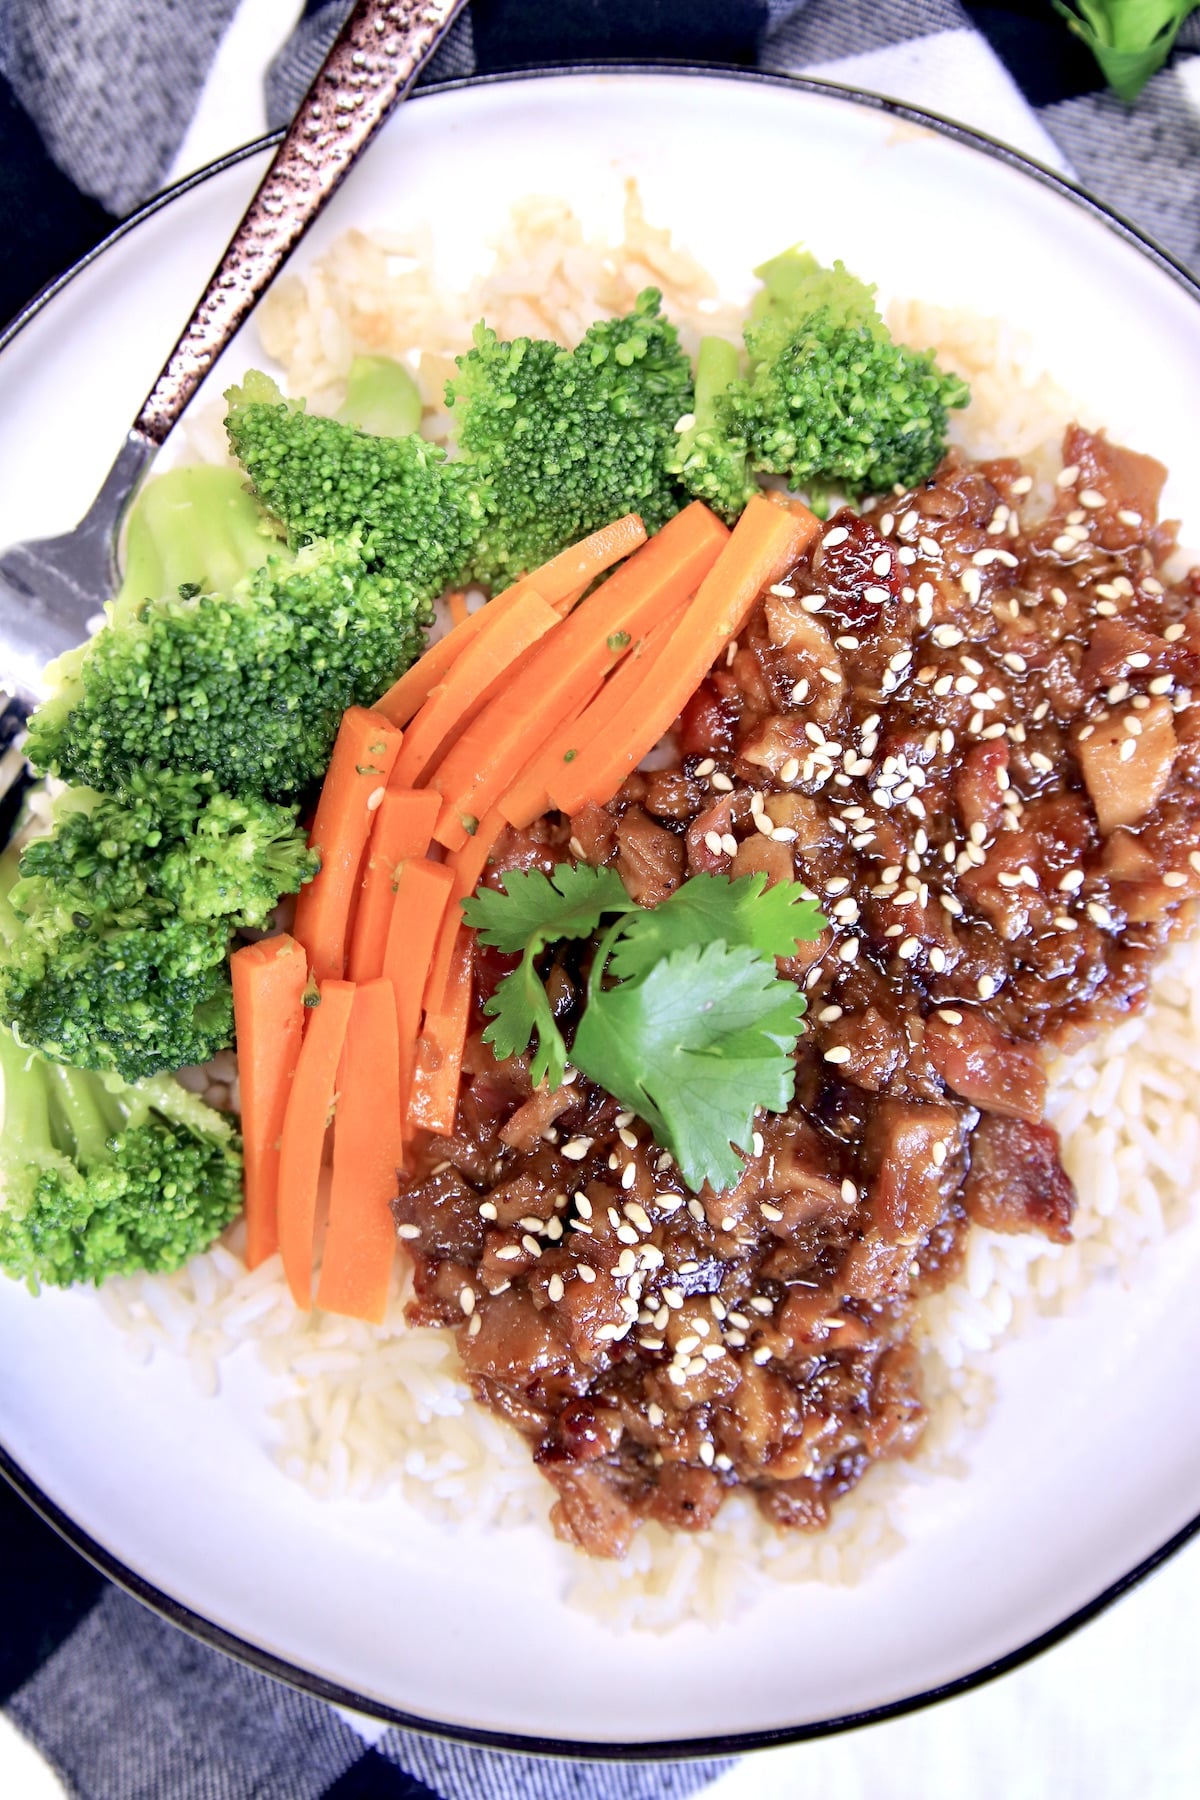 Plate of Mongolian Pork with broccoli and carrots over rice.